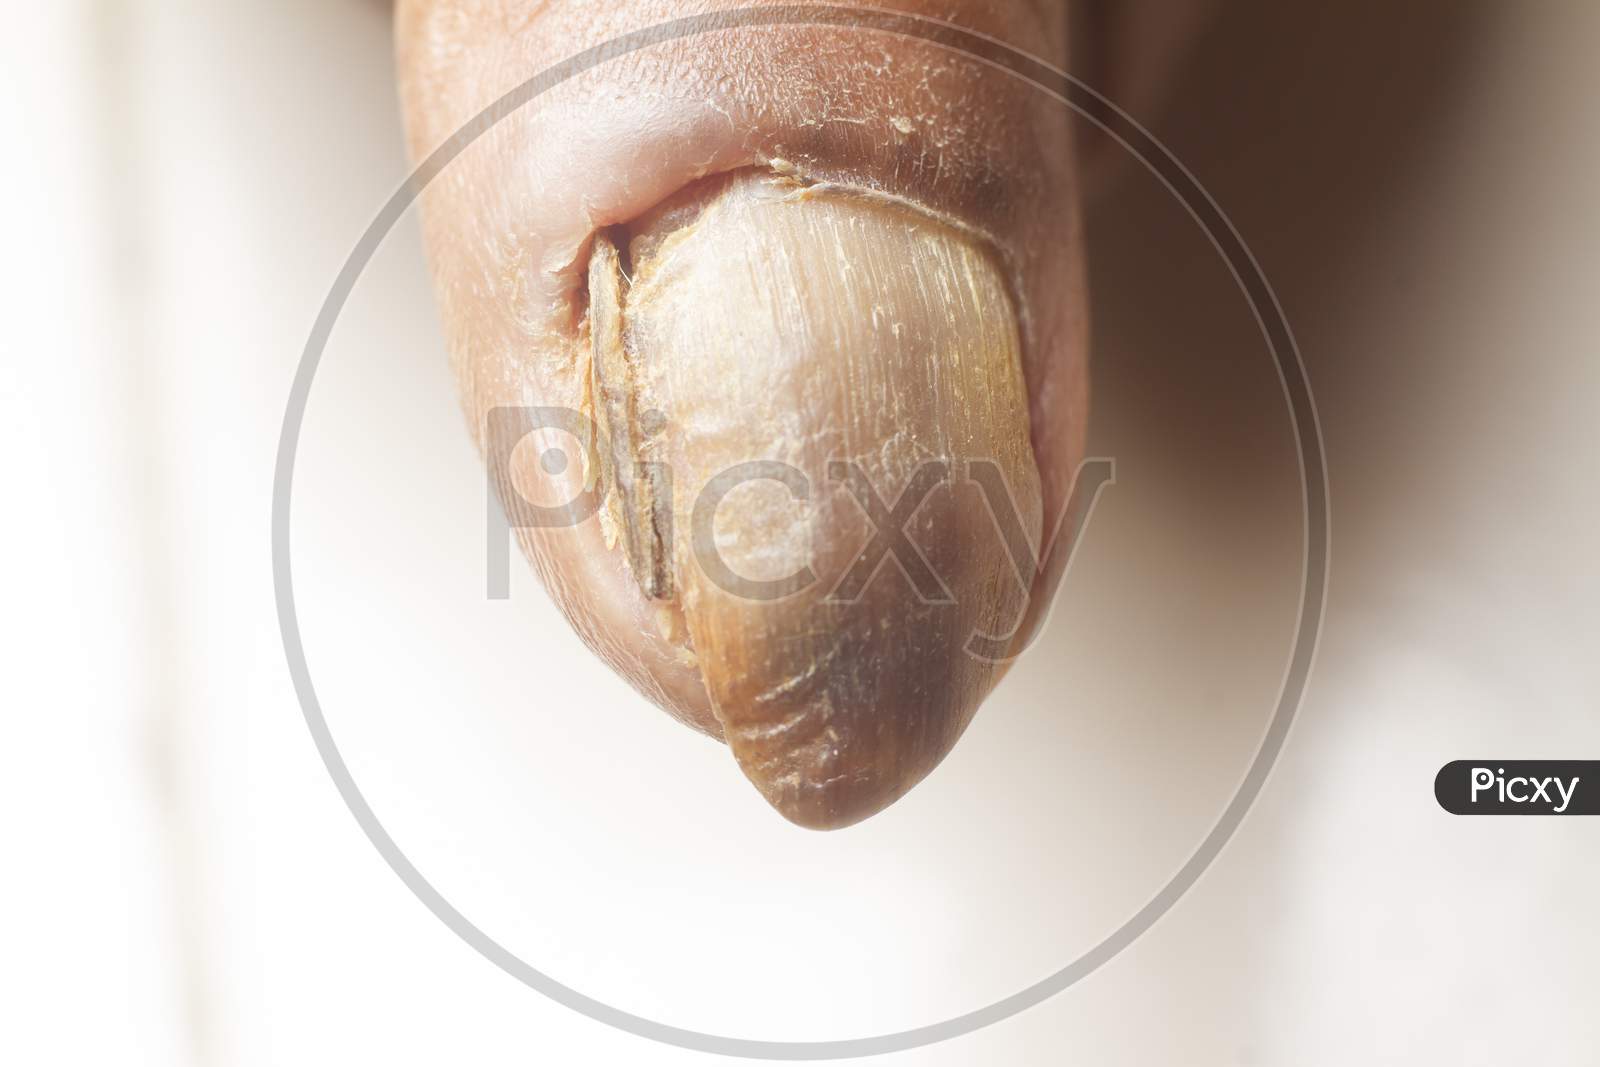 Close Nail Fungus Infection On Thumb Stock Footage Video (100%  Royalty-free) 1019445556 | Shutterstock